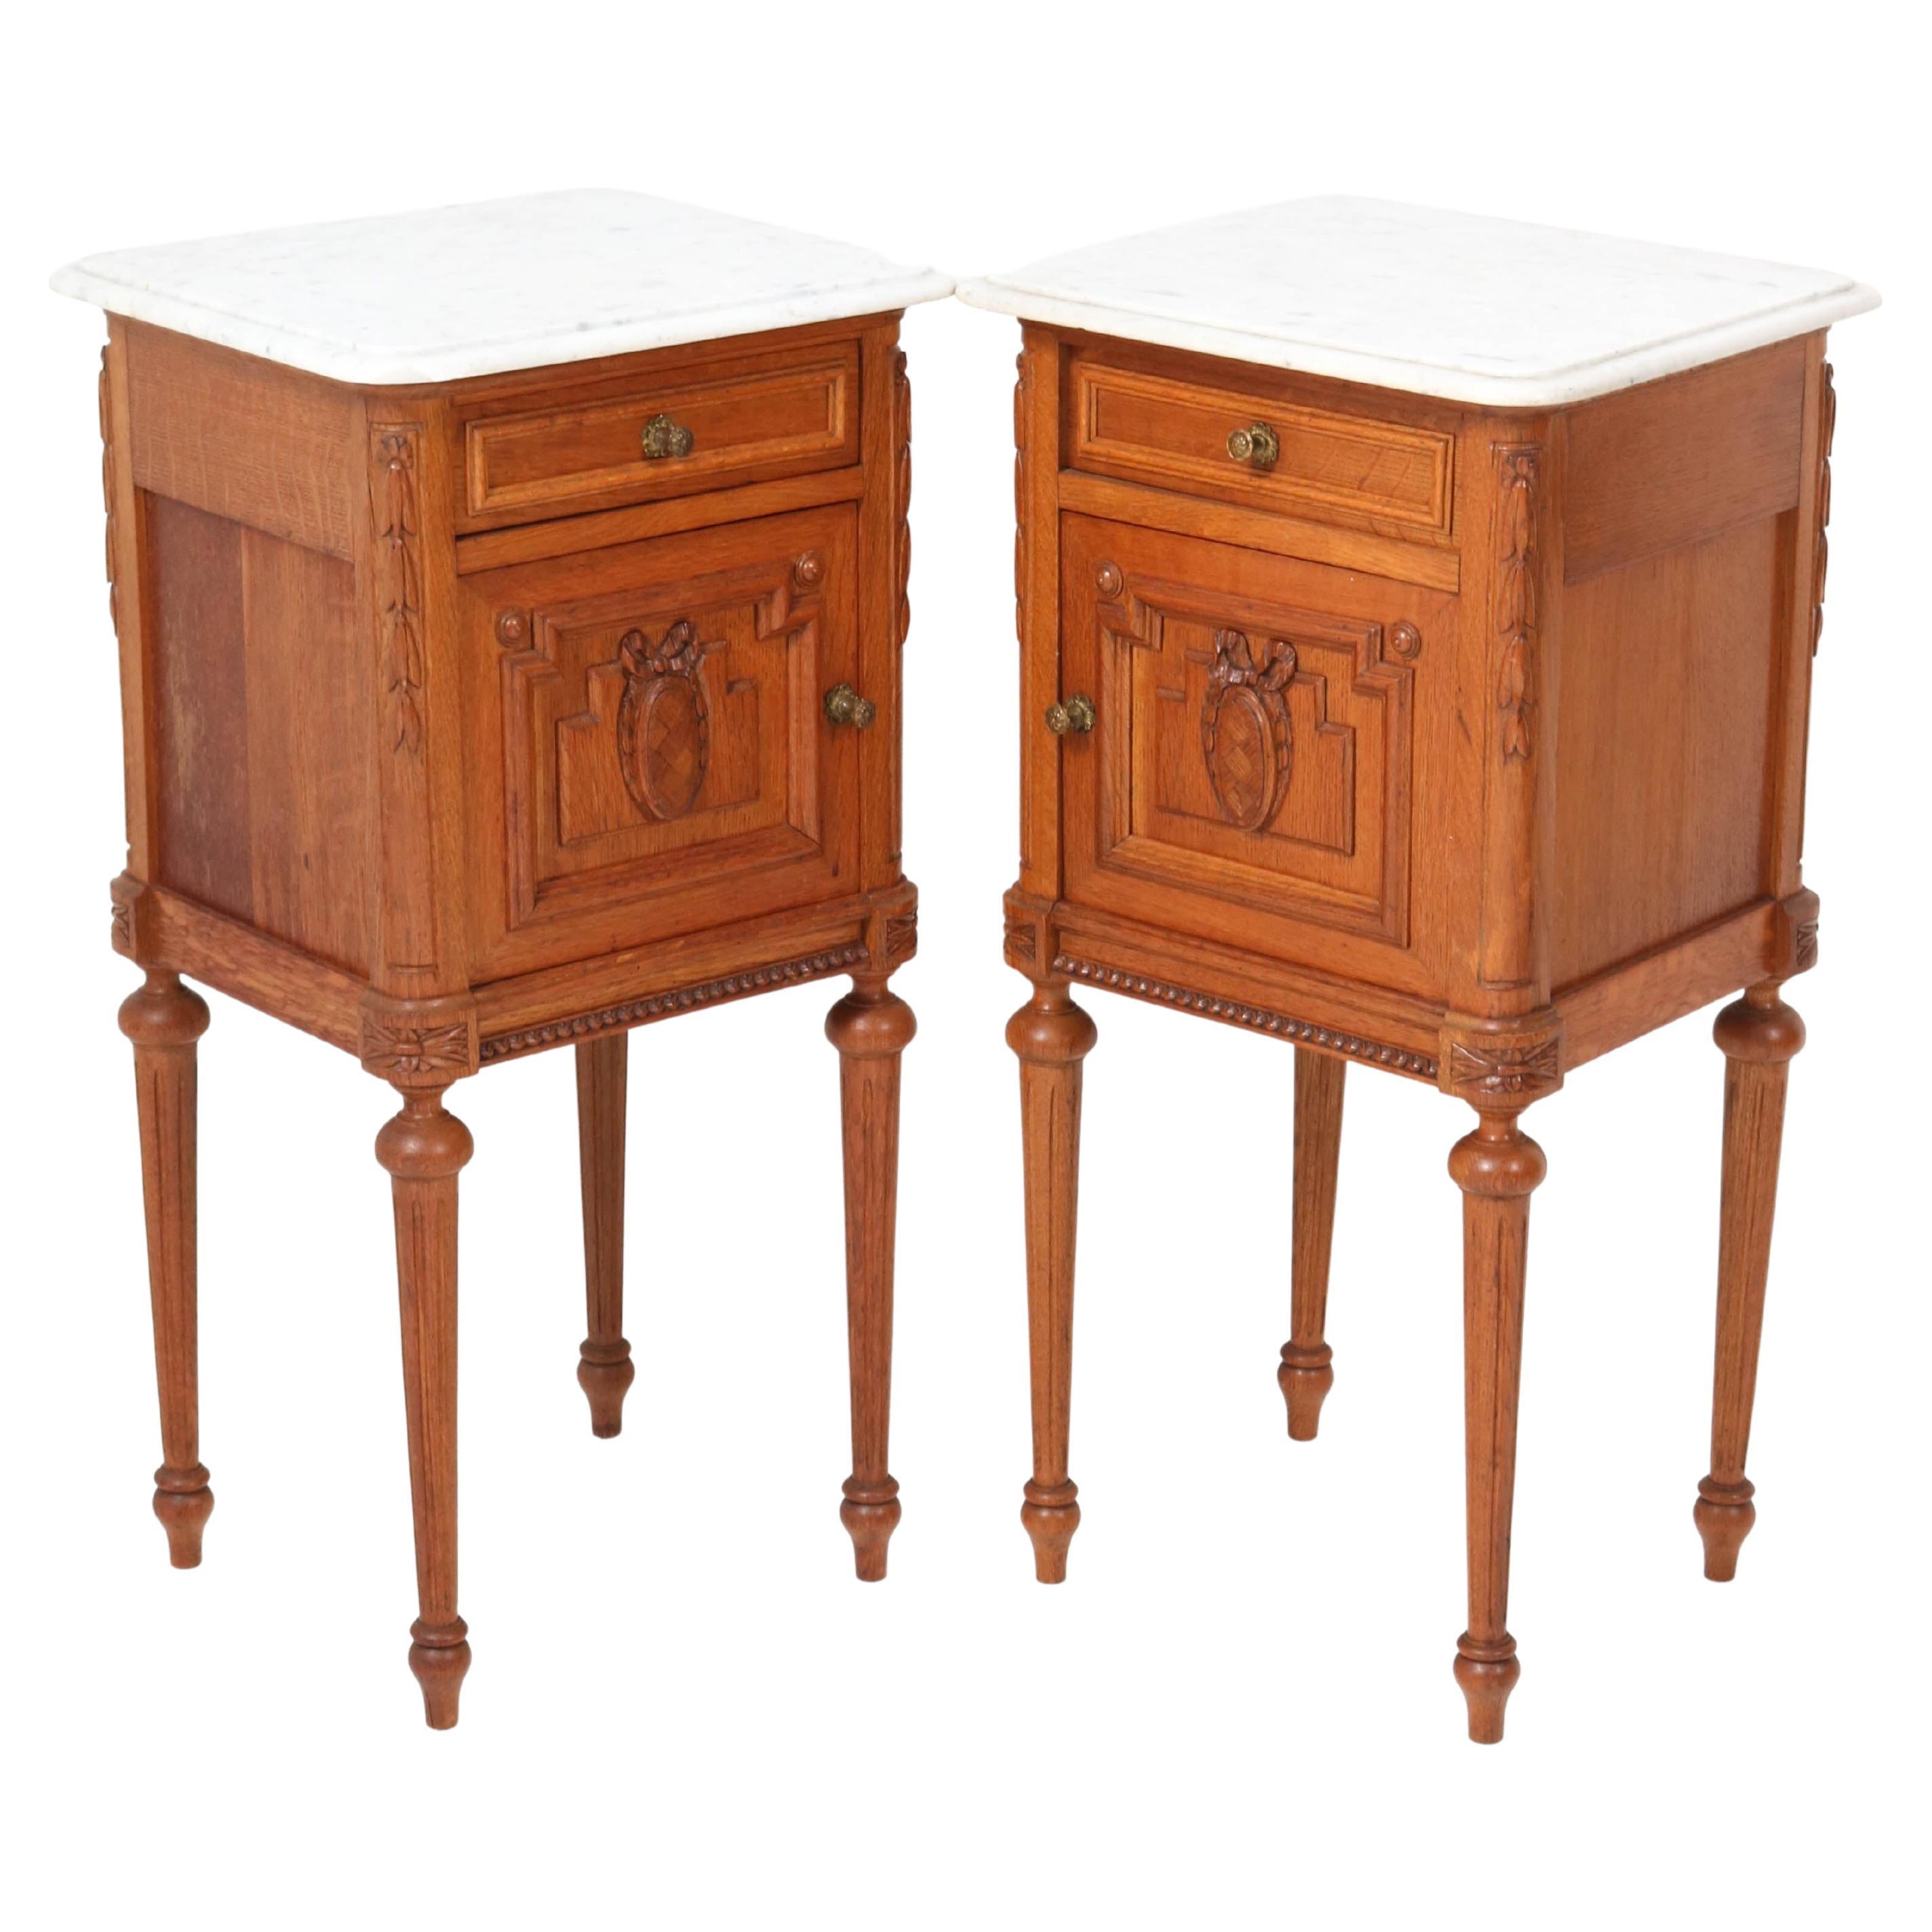 Two French Oak Art Nouveau Nightstands or Bedside Tables, 1900s